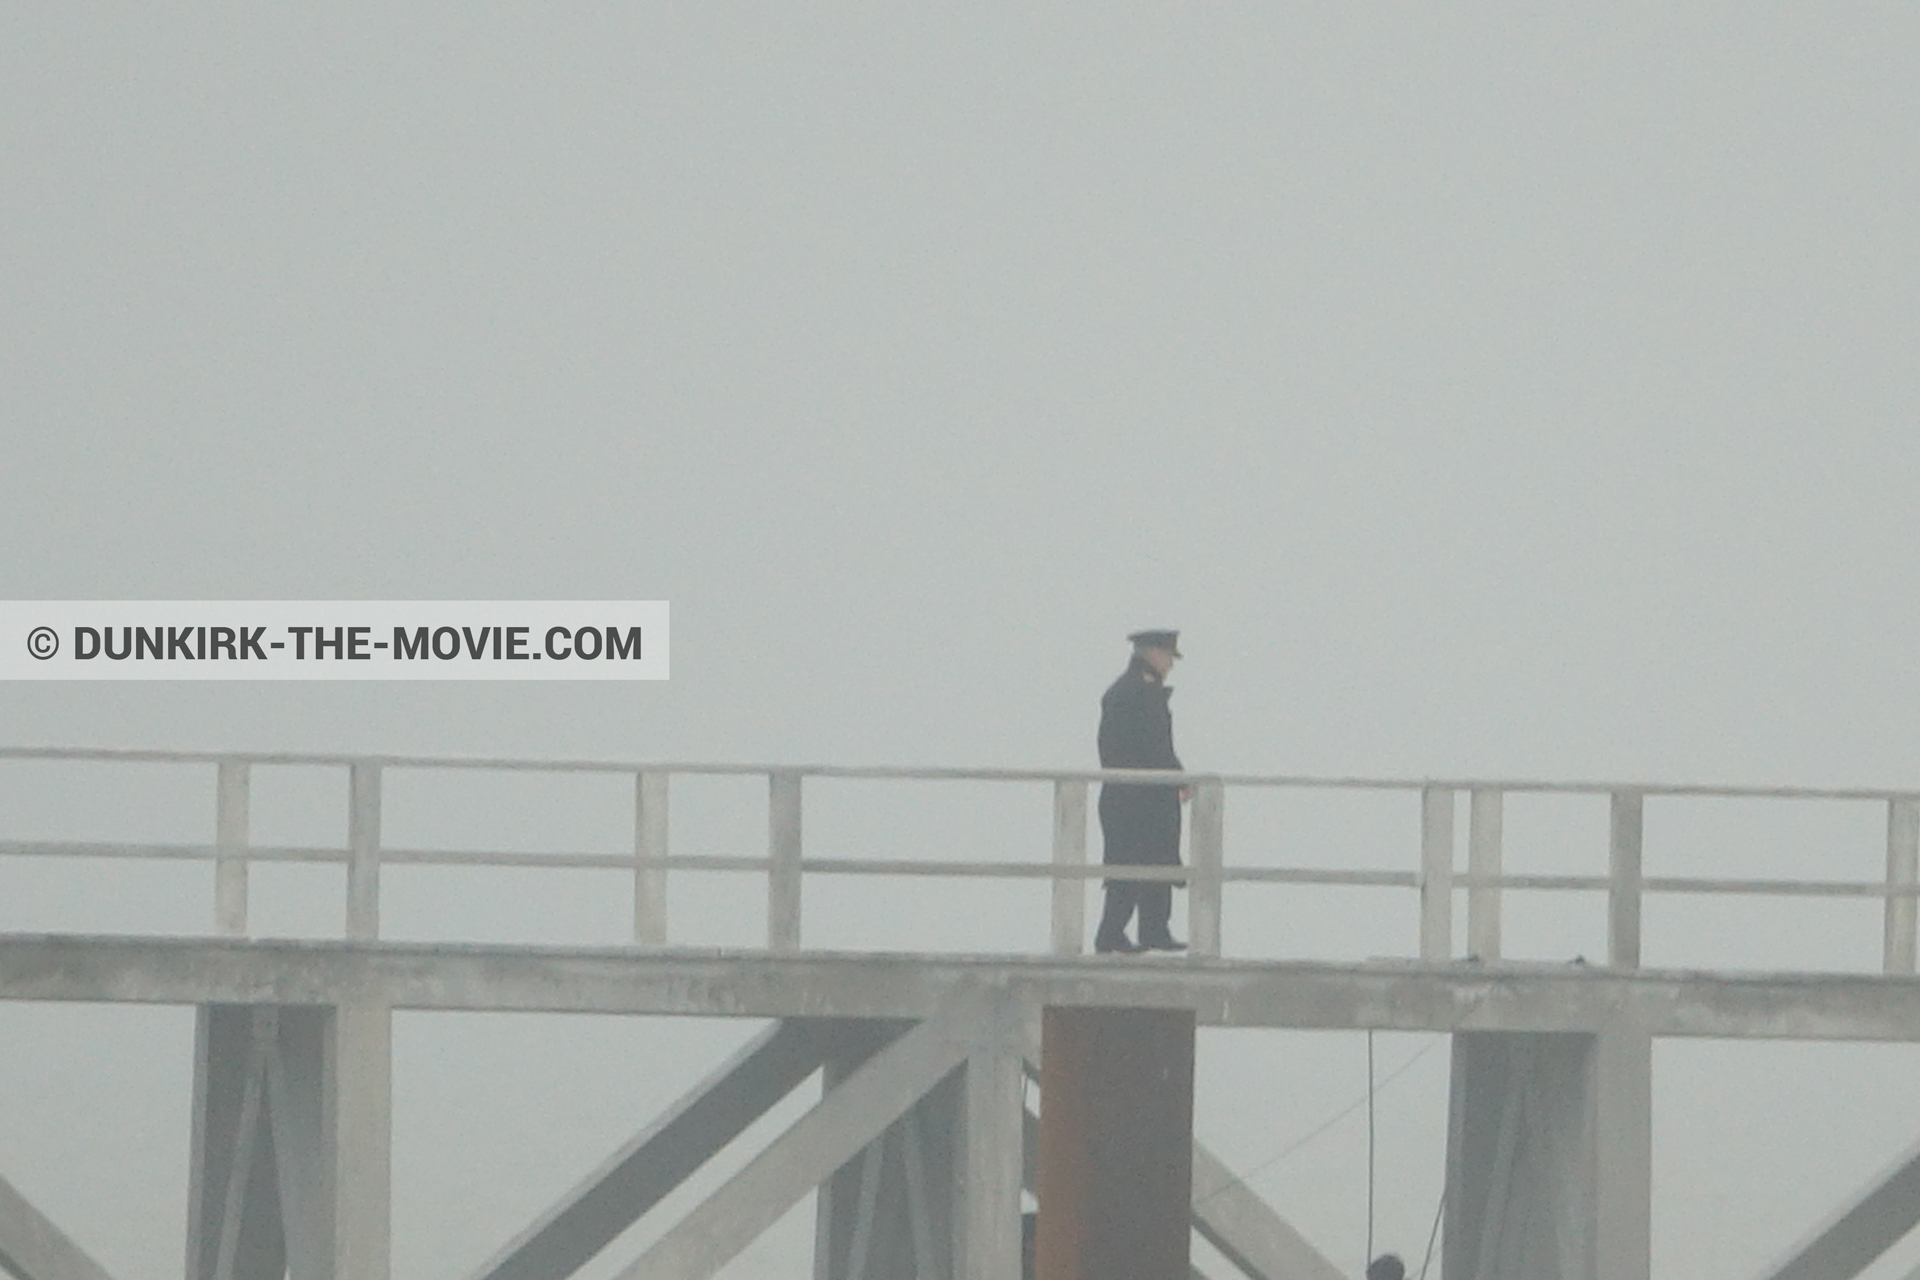 Picture with actor, grey sky, EST pier,  from behind the scene of the Dunkirk movie by Nolan